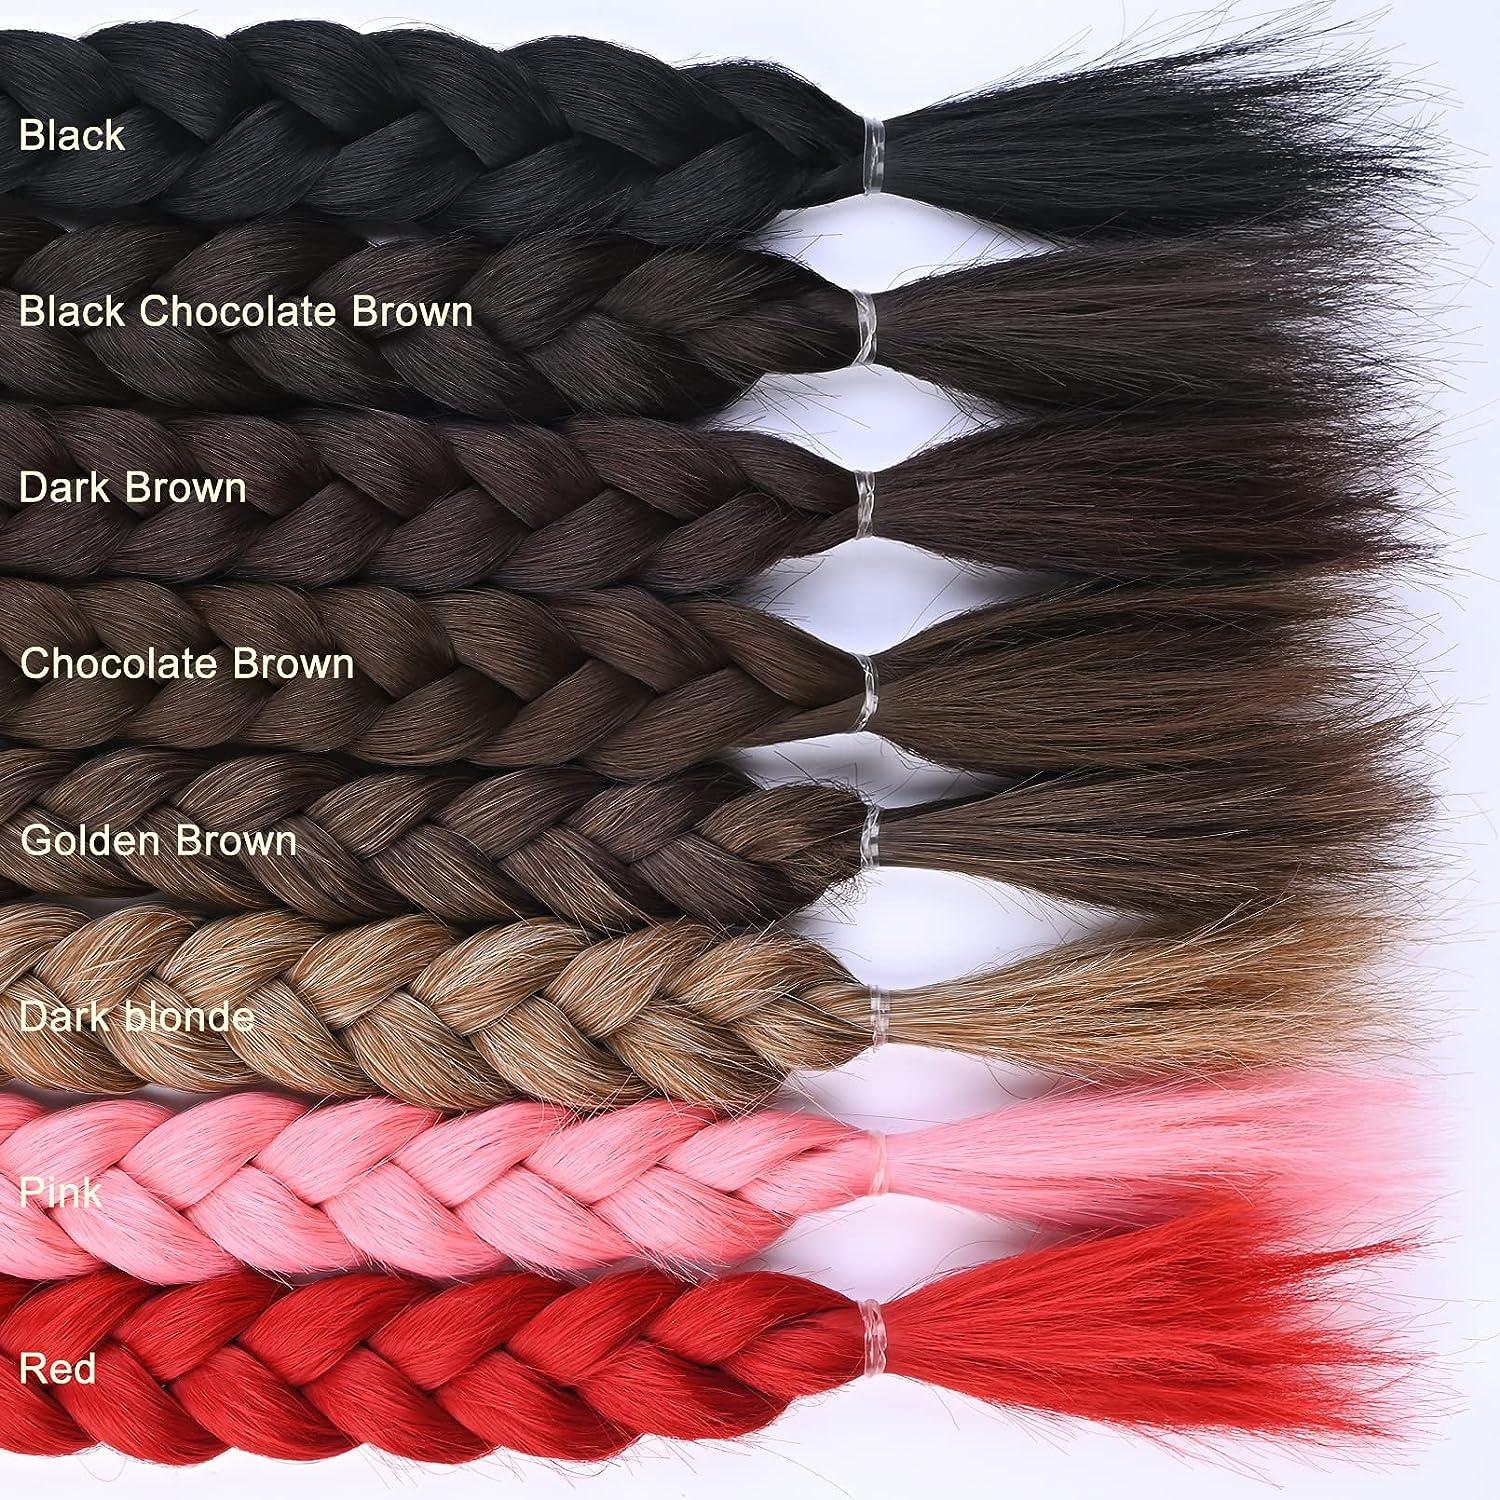 32inch Long Braided Ponytail Extension With Hair Tie Black Straight Wrap  Around Hair Braid Extensions For Women Synthetic High Temperature Fluffy  Natu